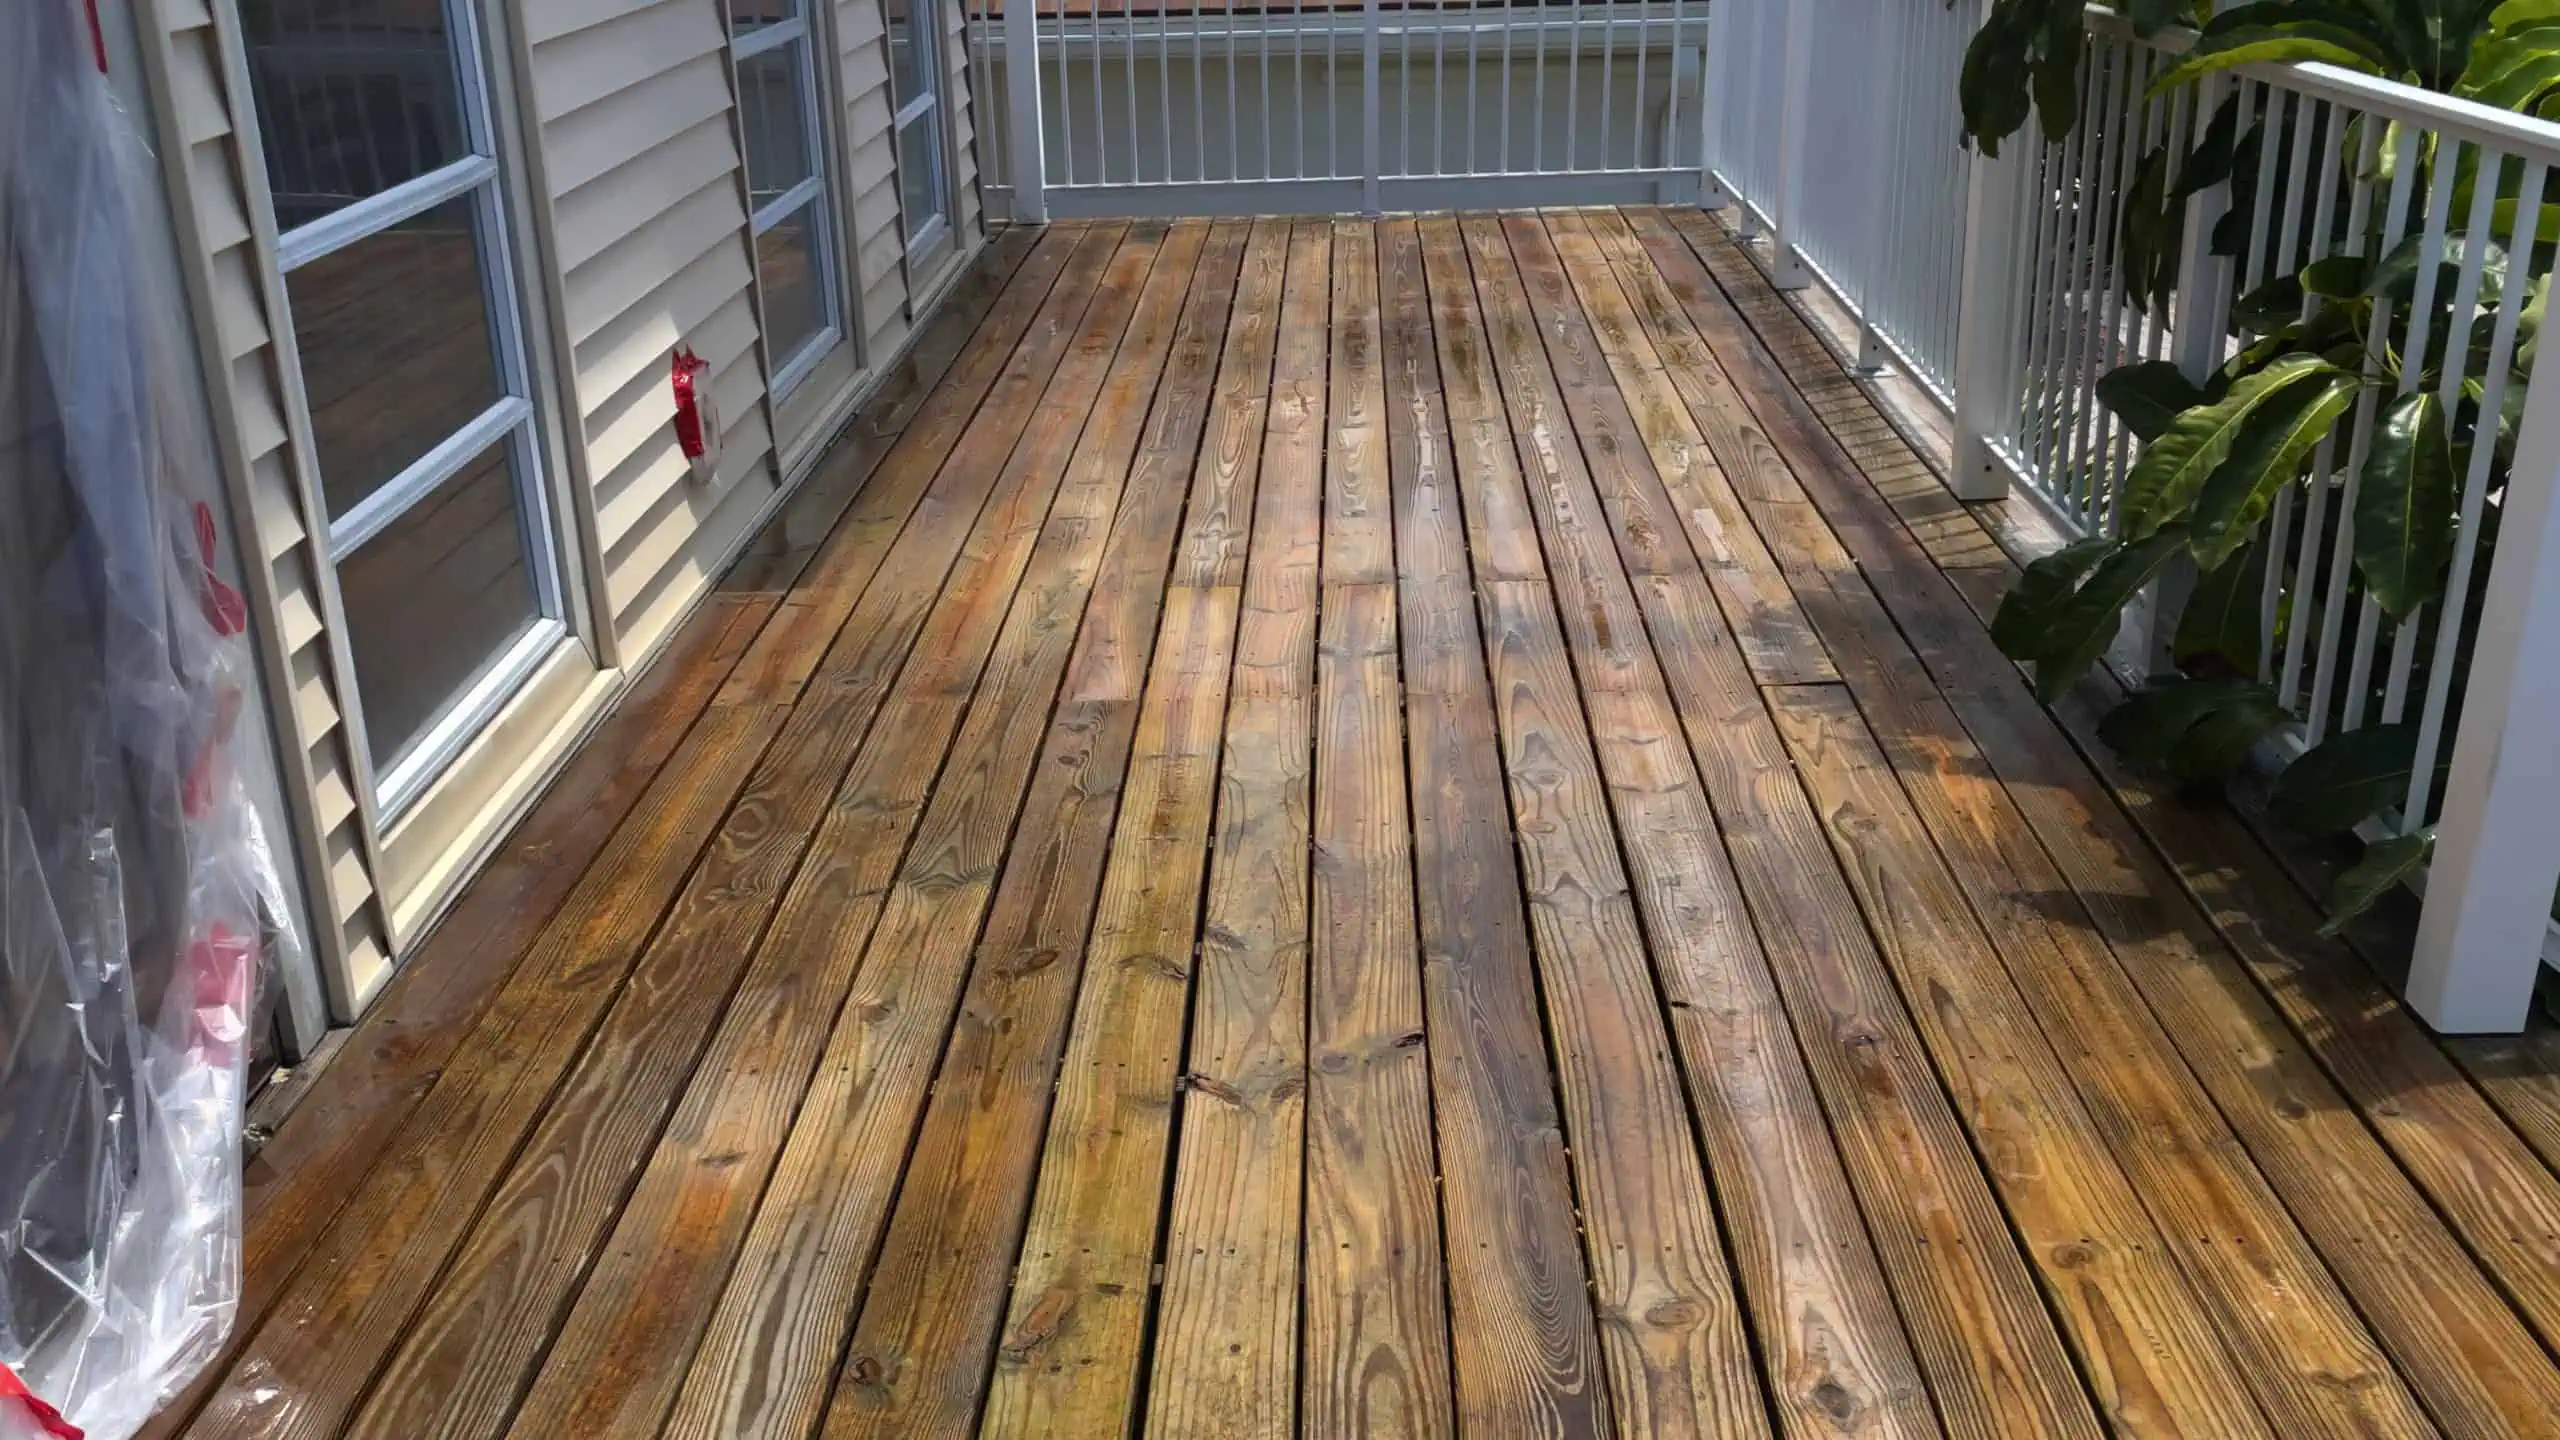 "a wood deck looking bright and clean after wood cleaning service by Spic N Span Pressure Washing and Window Cleaning "